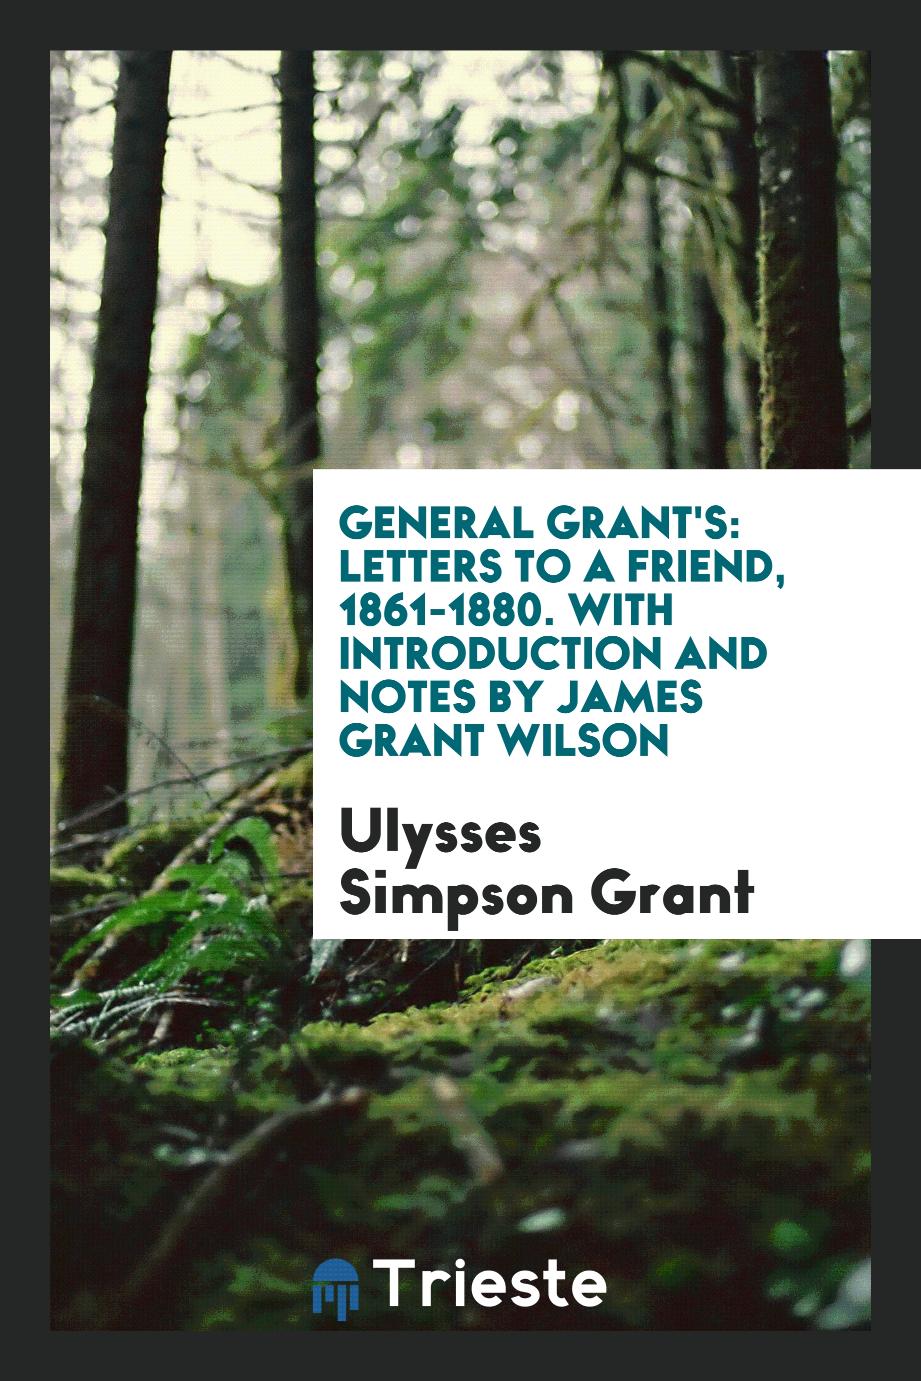 General Grant's: Letters to a Friend, 1861-1880. With Introduction and Notes by James Grant Wilson